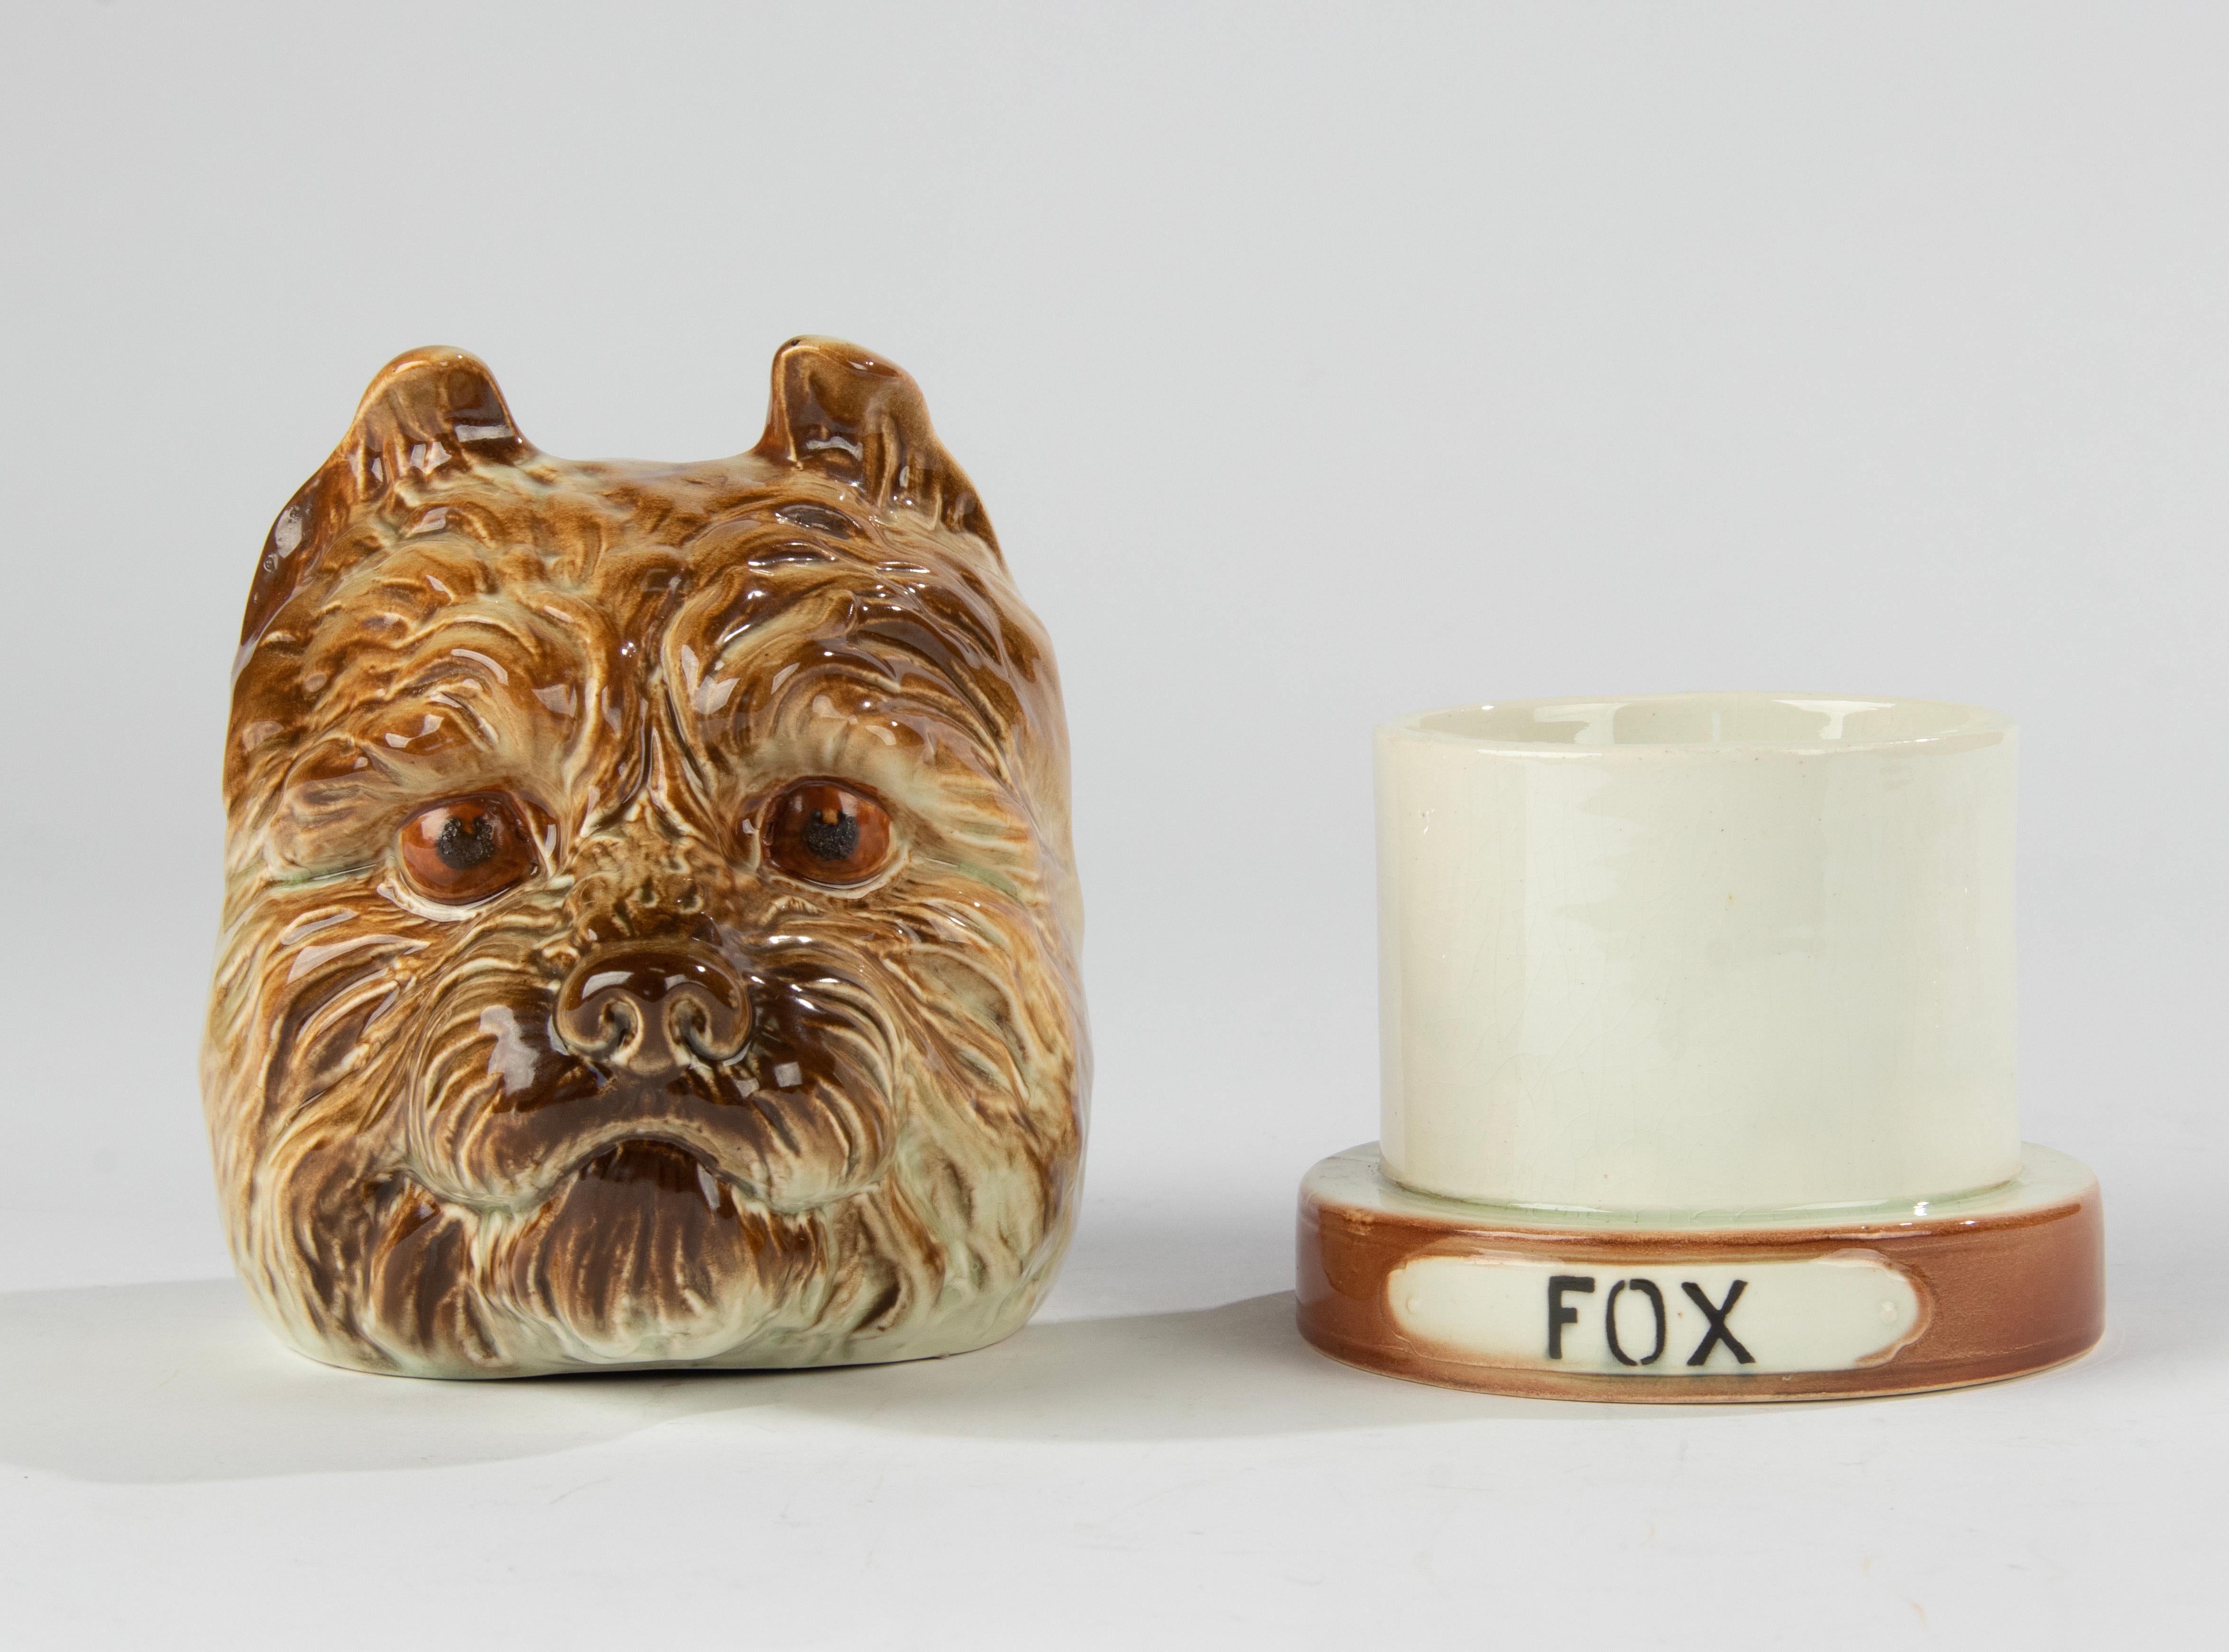 A lovely antique ceramic tobacco jar, shaped as a fox terrier. 
The bottom is marked France, probably made by Sint Clément. 
The jar is in good condition. No chips and no hairlines. Beautiful glaze. 
This item will be packed with great care.